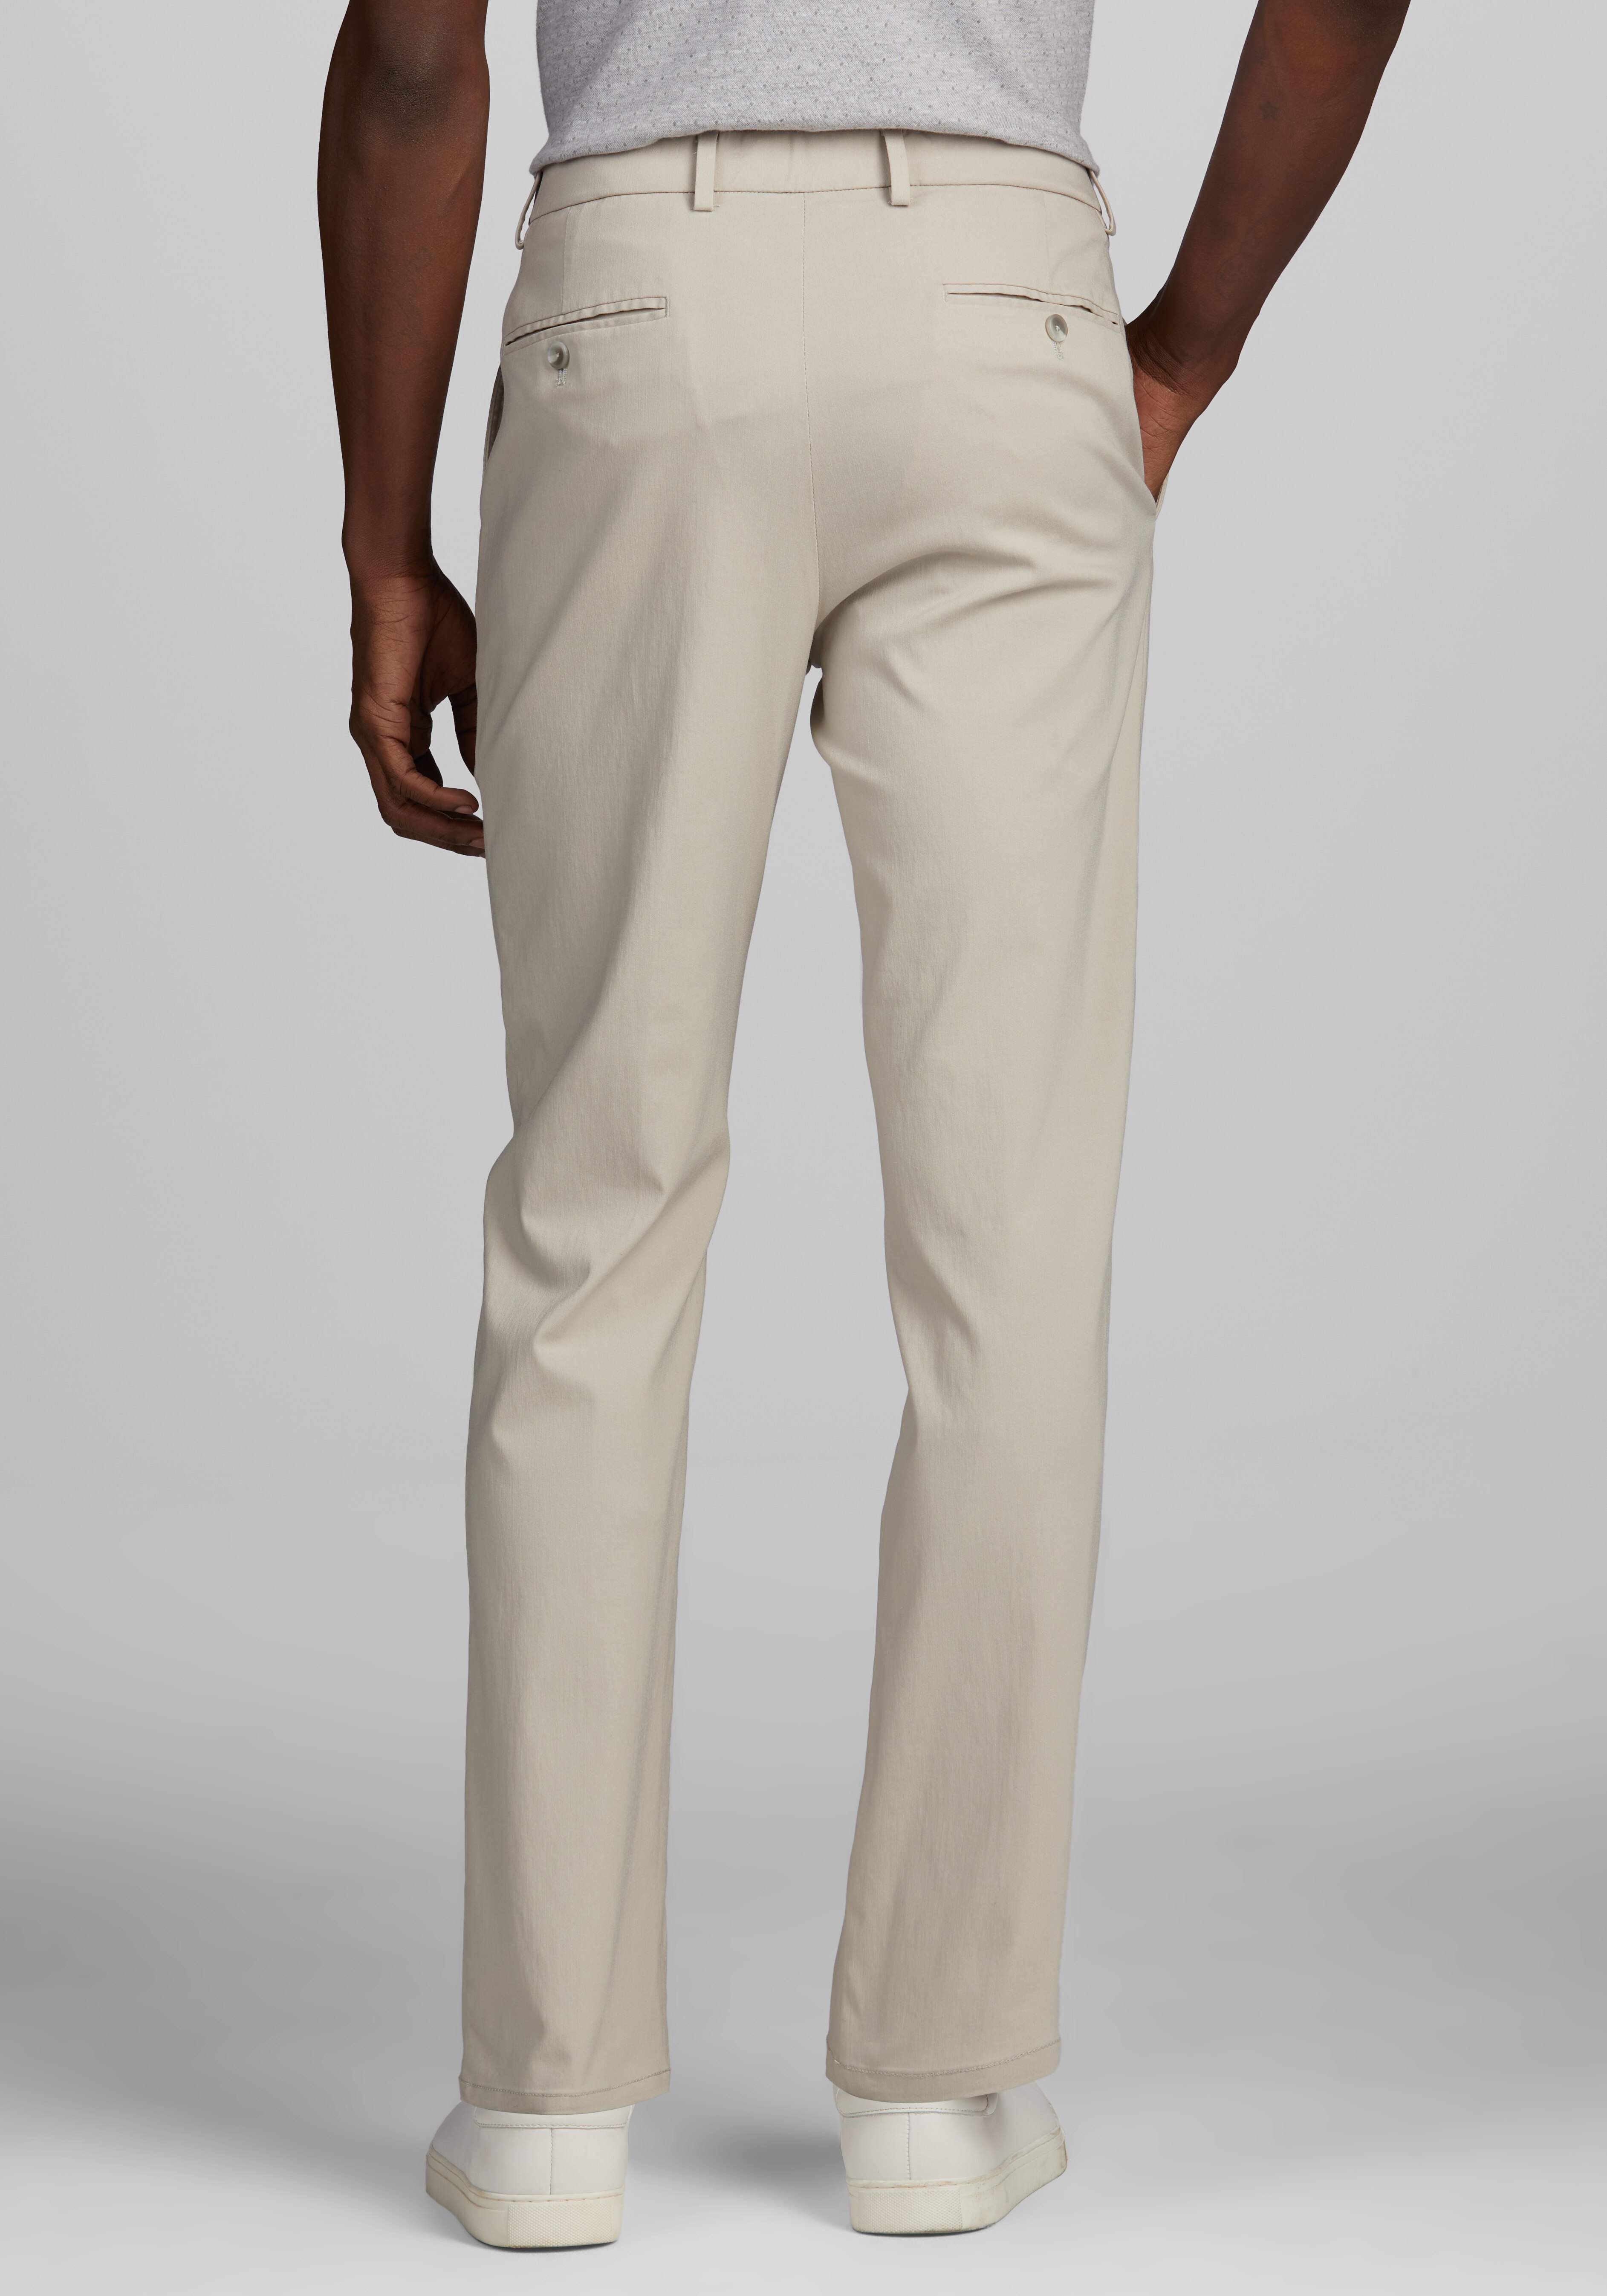 Jos. A. Bank Men's Traveler Motion Tailored Fit Chinos